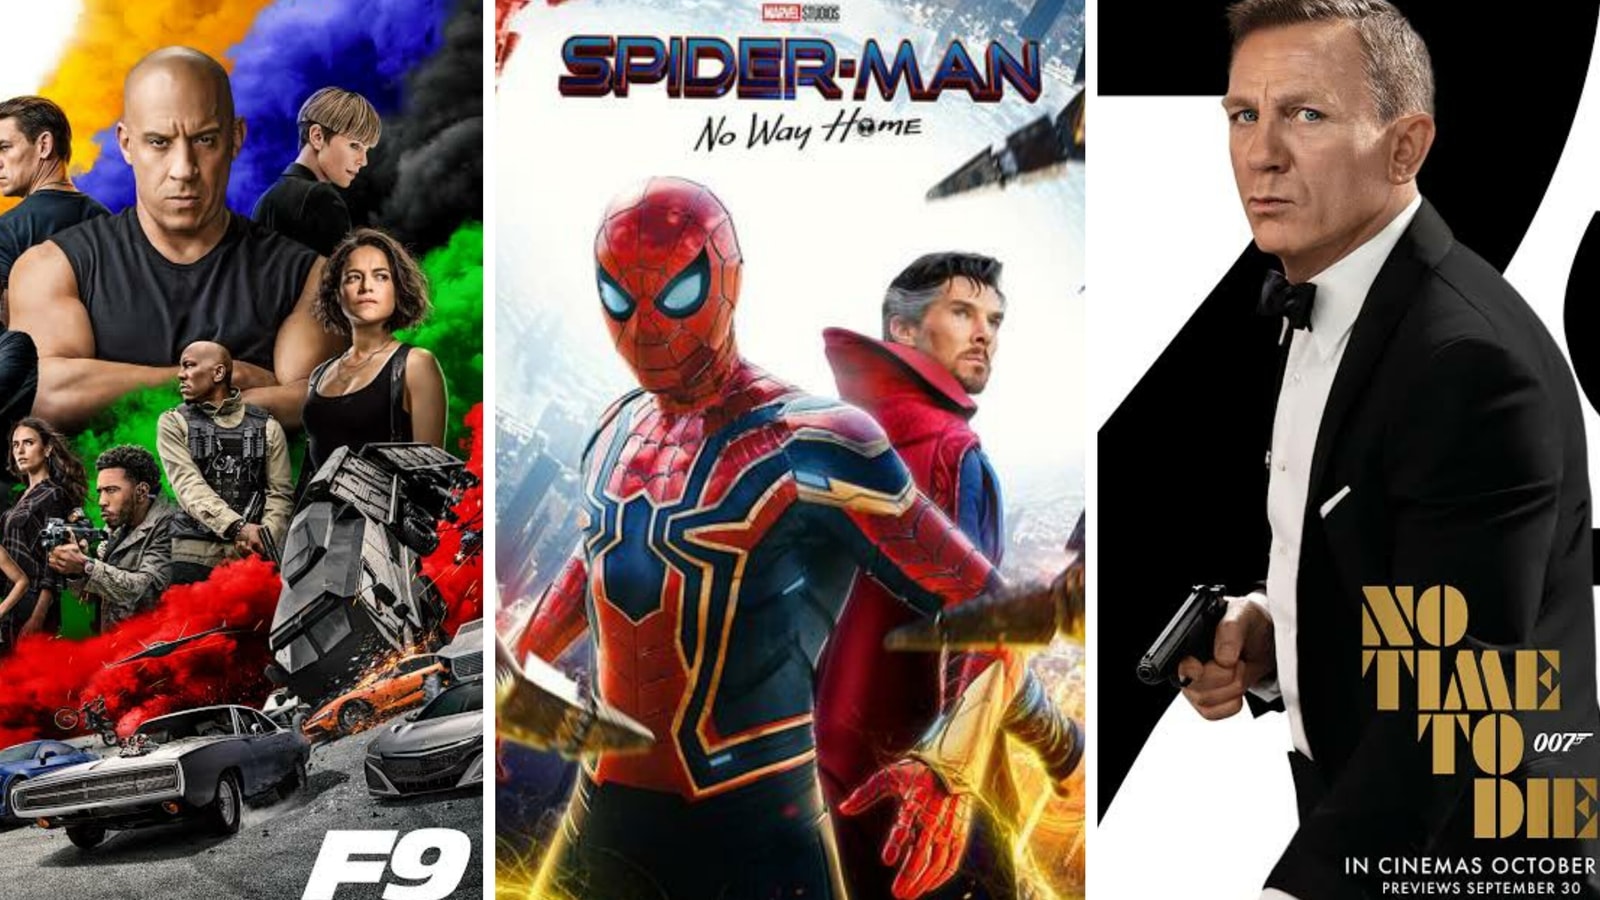 From F9 to SpiderMan No Way Home and Bond How 2021 saw return of